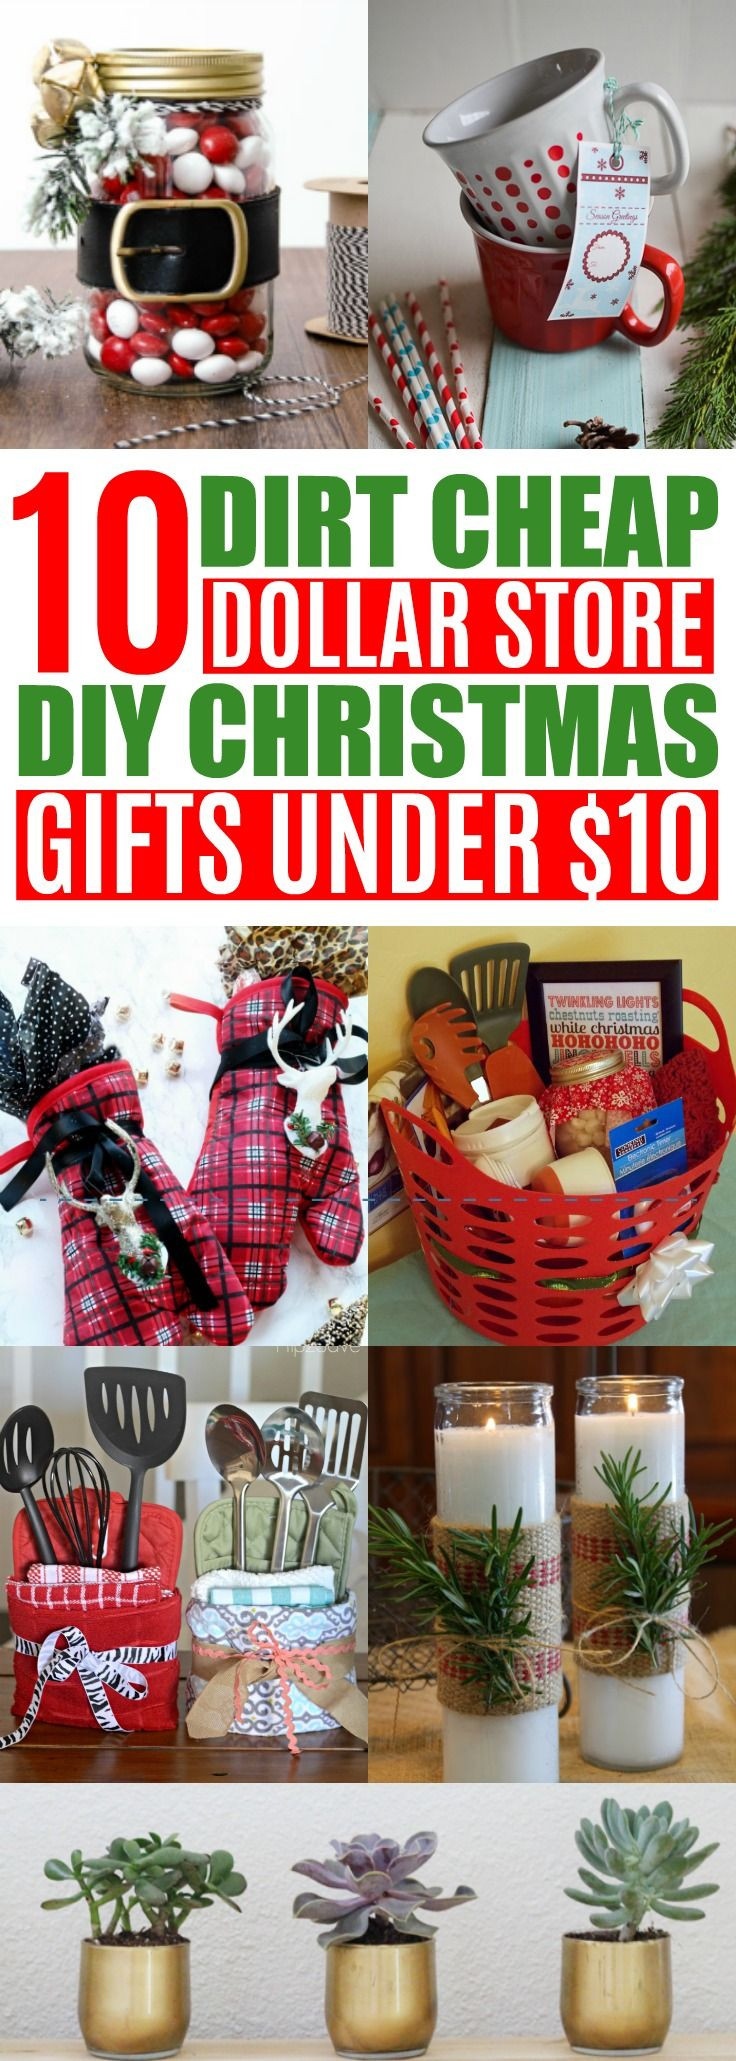 Good Cheap Christmas Gifts
 10 DIY Cheap Christmas Gift Ideas From the Dollar Store